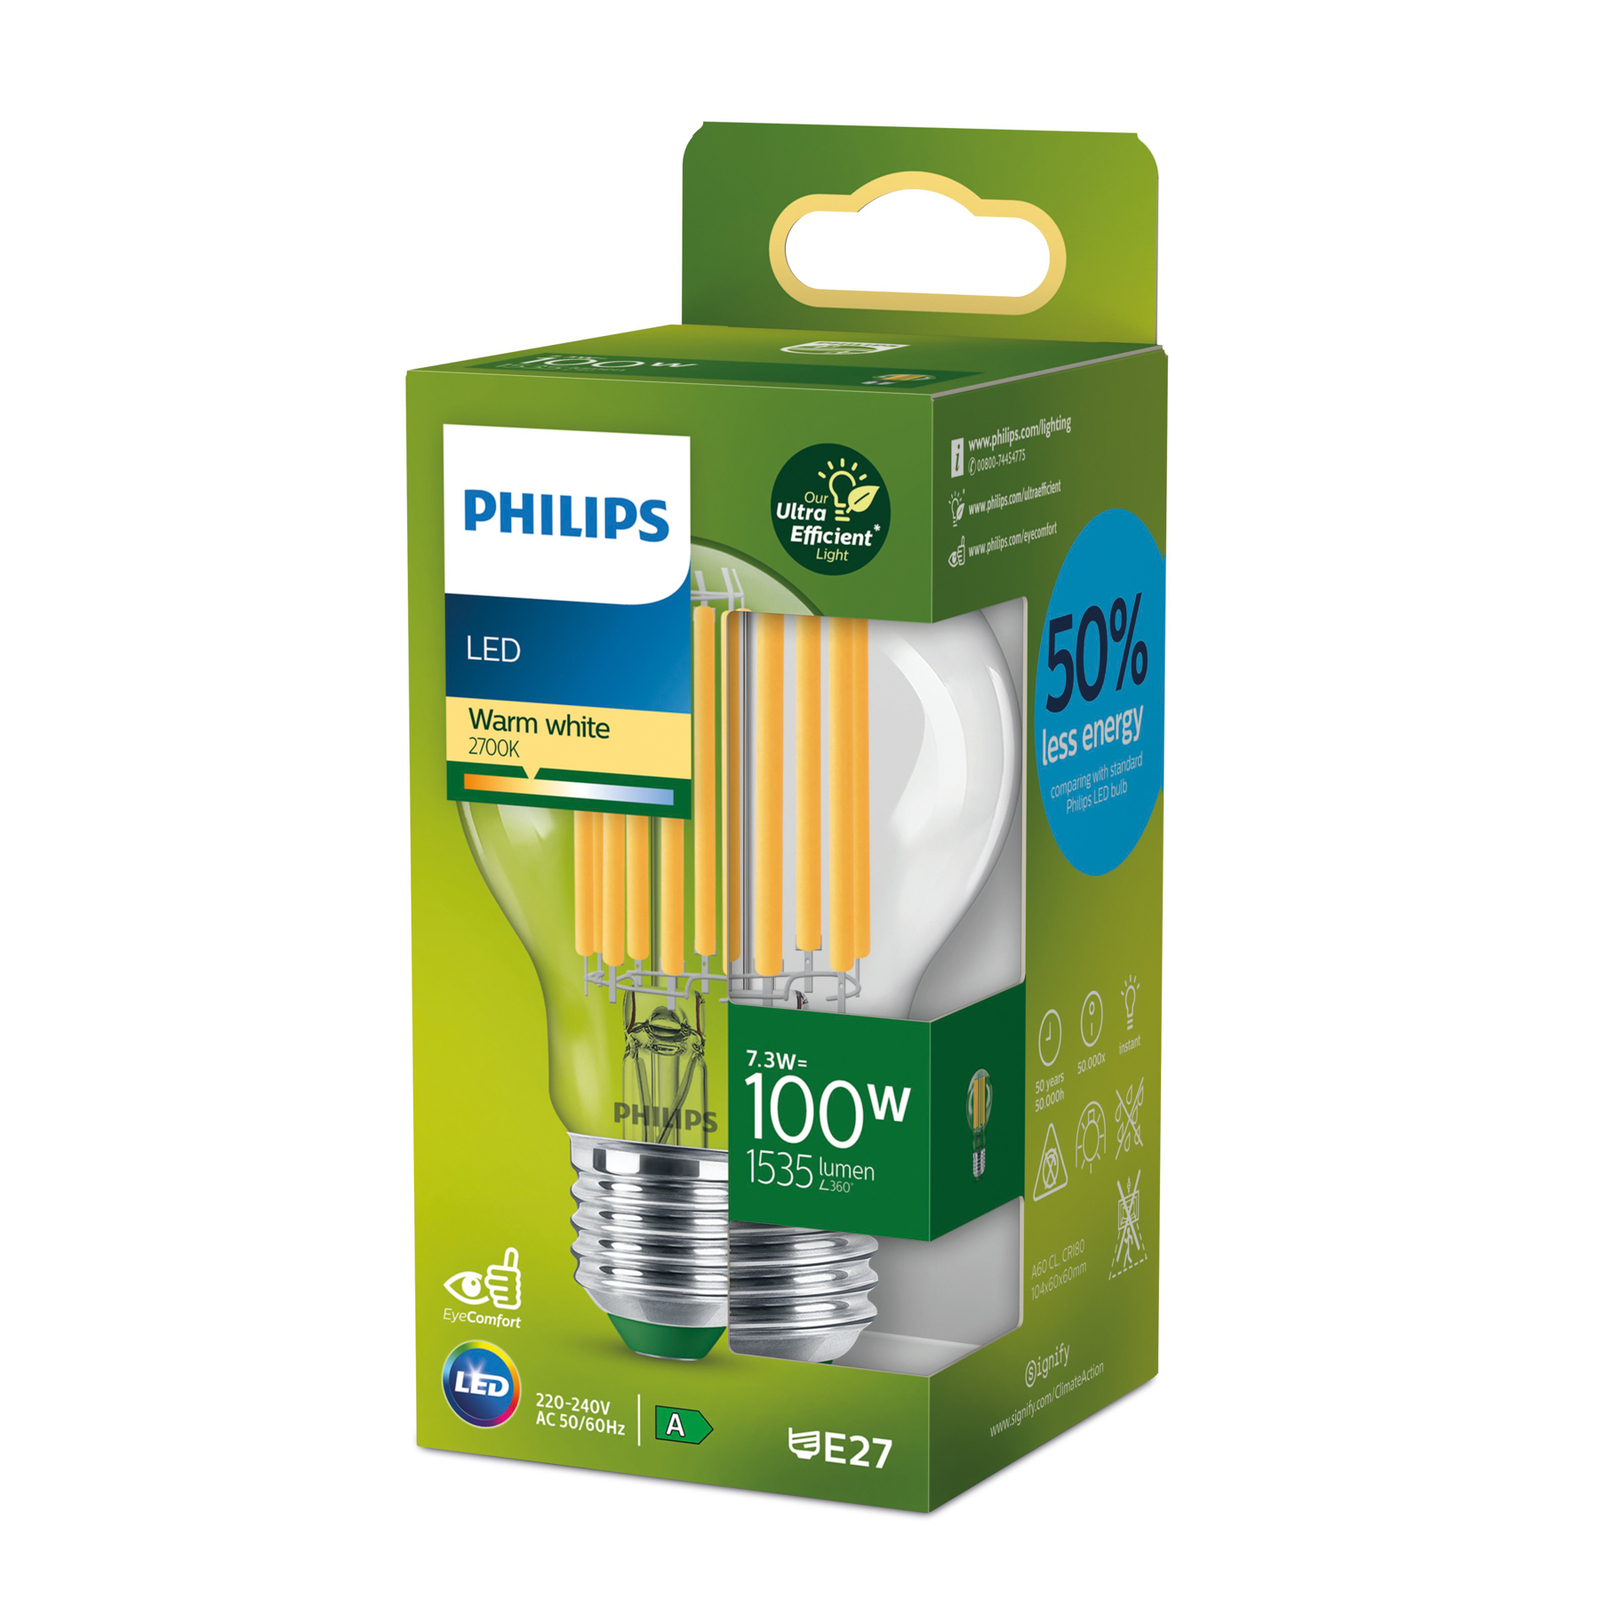 Philips E27 Lamp A60 7,3W 1535lm 2.700K clear